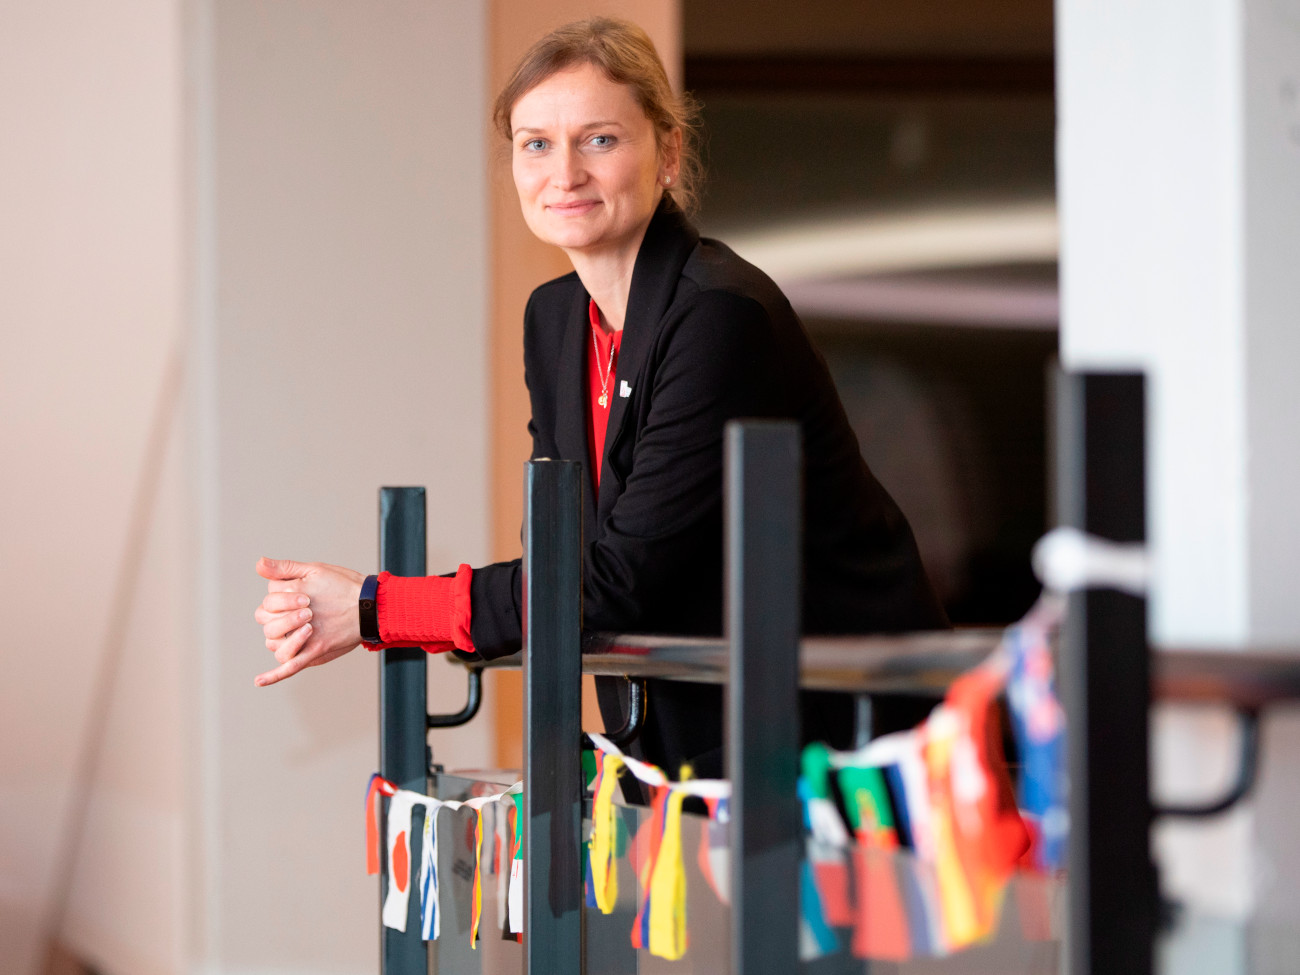 Julia Holz leans against a railing on which various national flags are displayed.